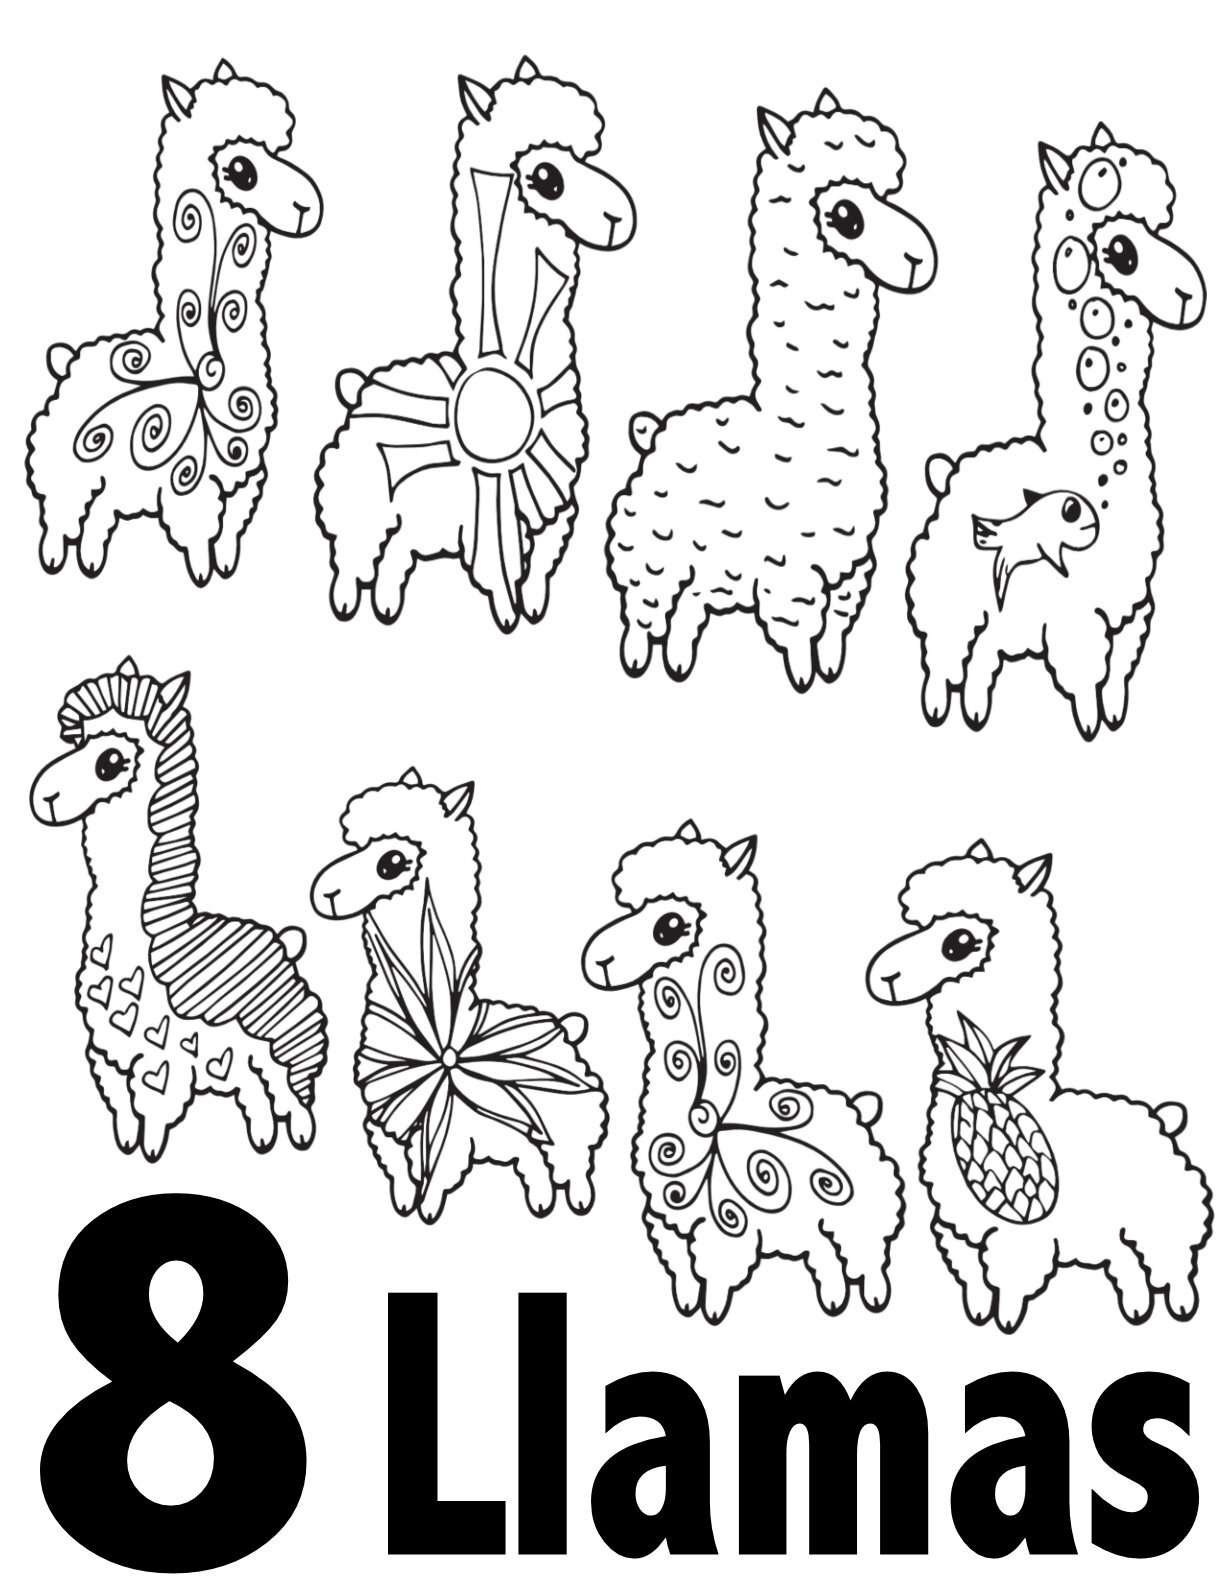 Llama Number Coloring Pages Collection 1-10 - Free Preschool/Kindergarten Printable - Number 8CLICK TO DOWNLOAD THE 8 LLAMA PAGE ONLY